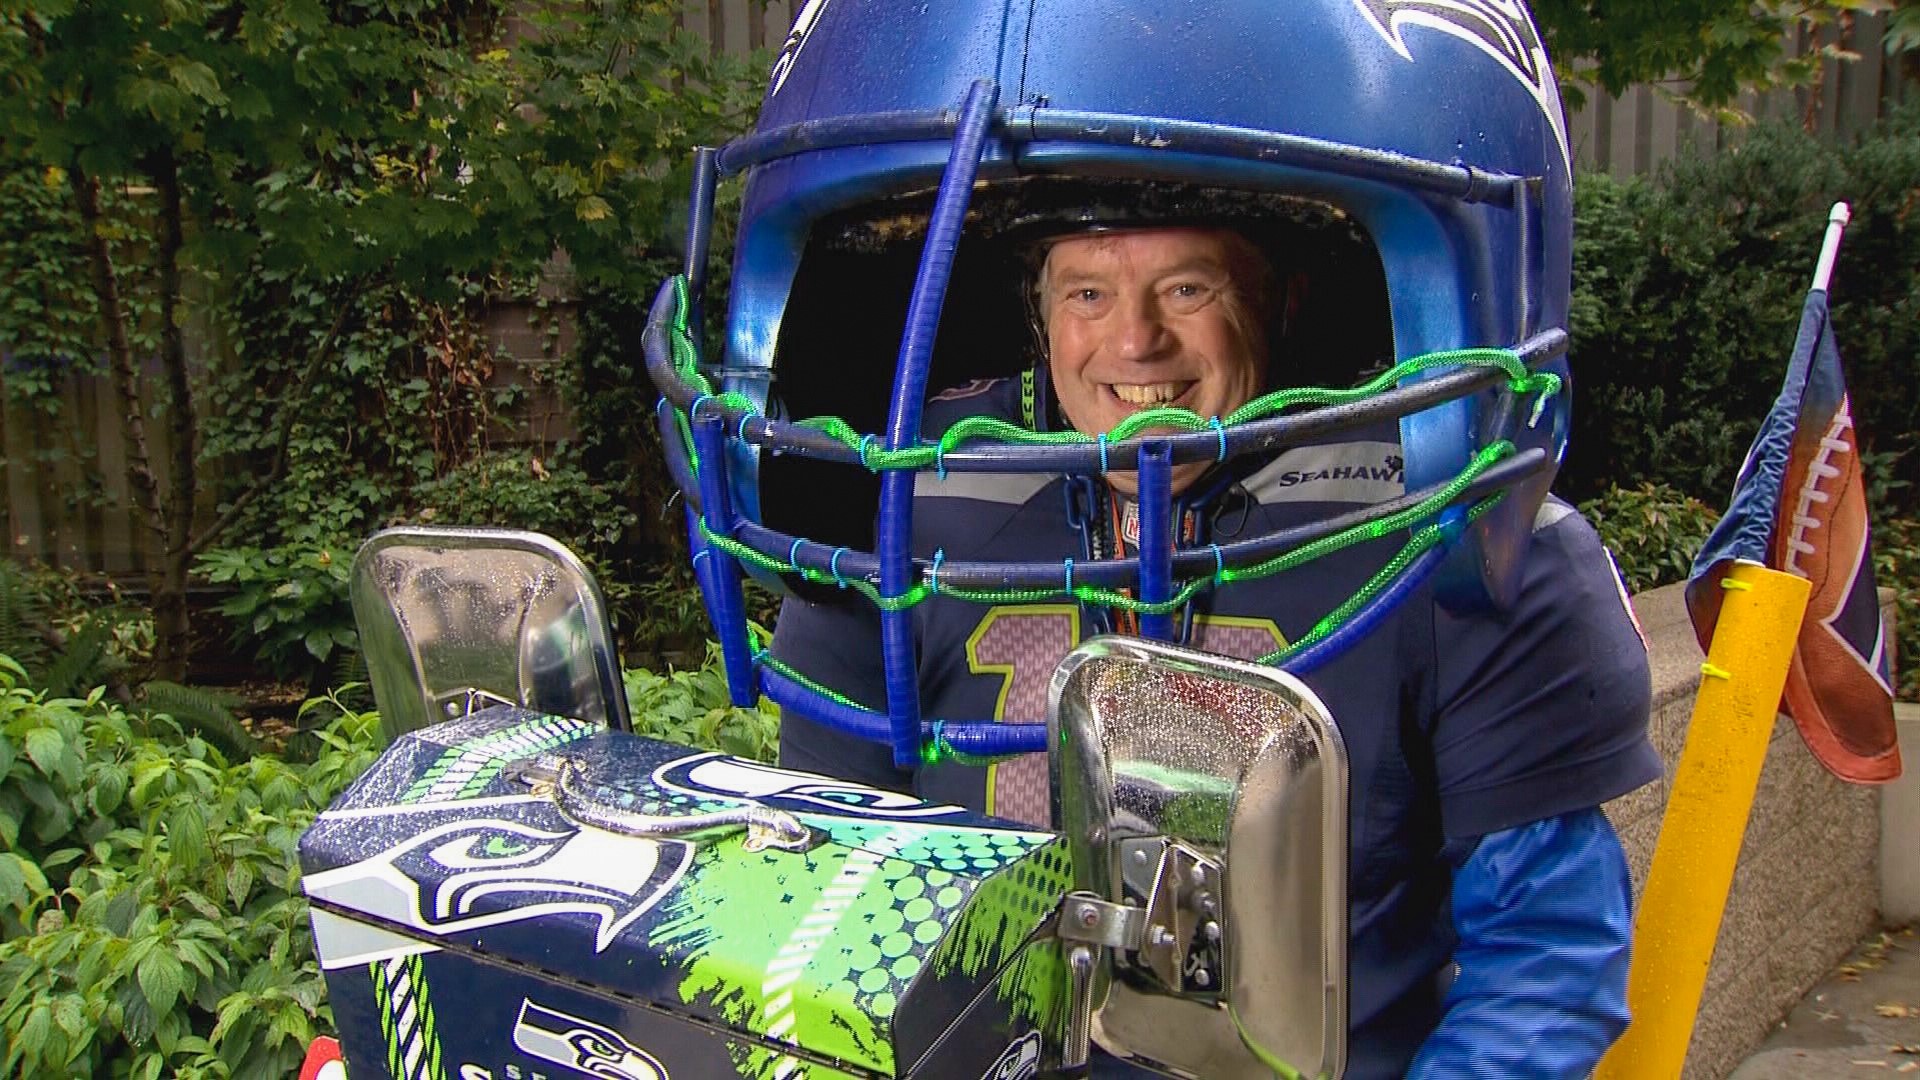 12's know Mike Melchior as the Helmet Guy -- riding a Hawks-clad bike in a massive football helmet